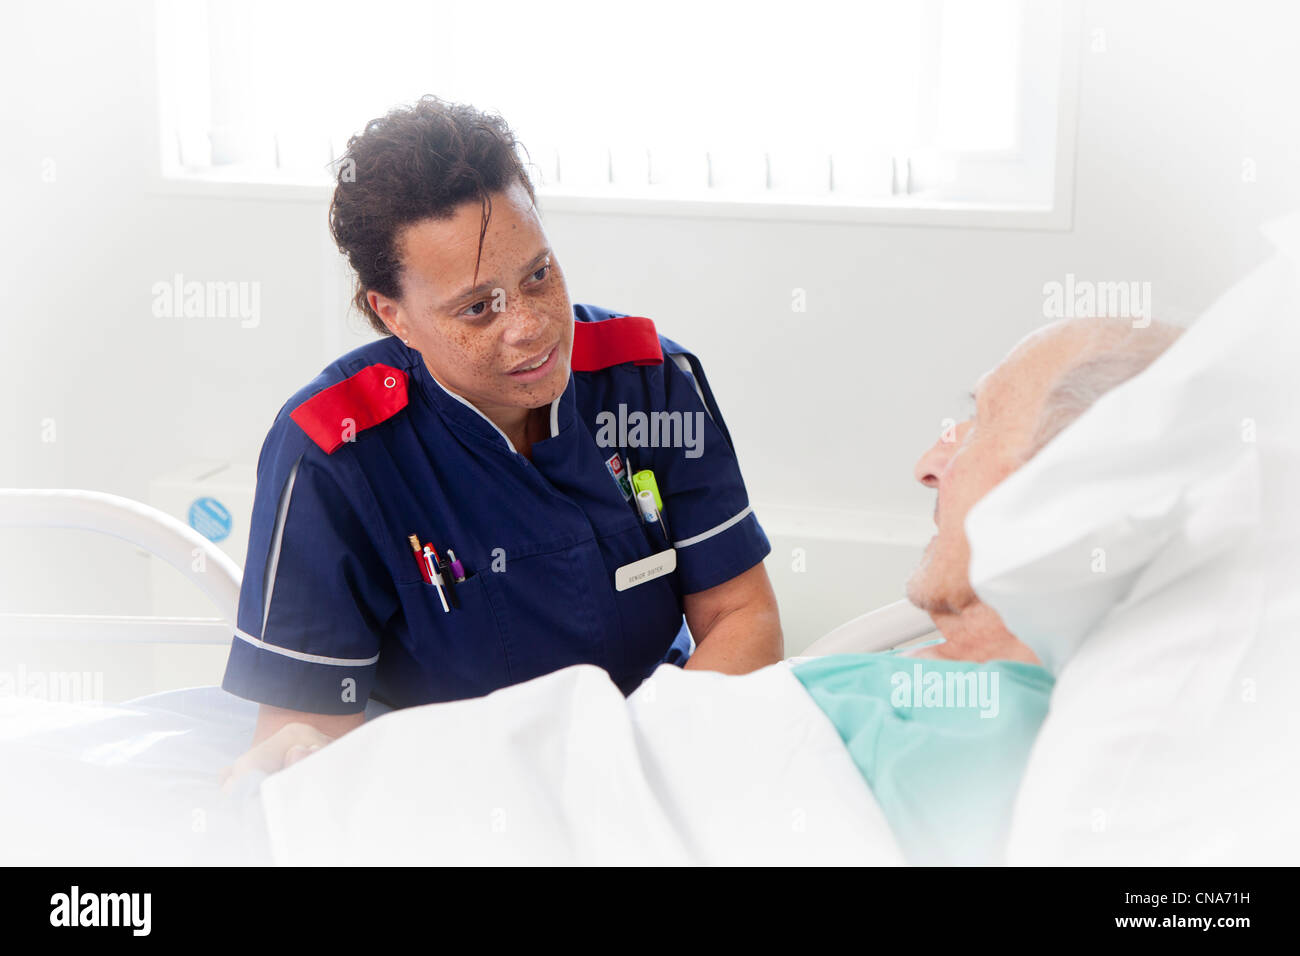 An elderly male patient being comforted by a nurse UK Stock Photo